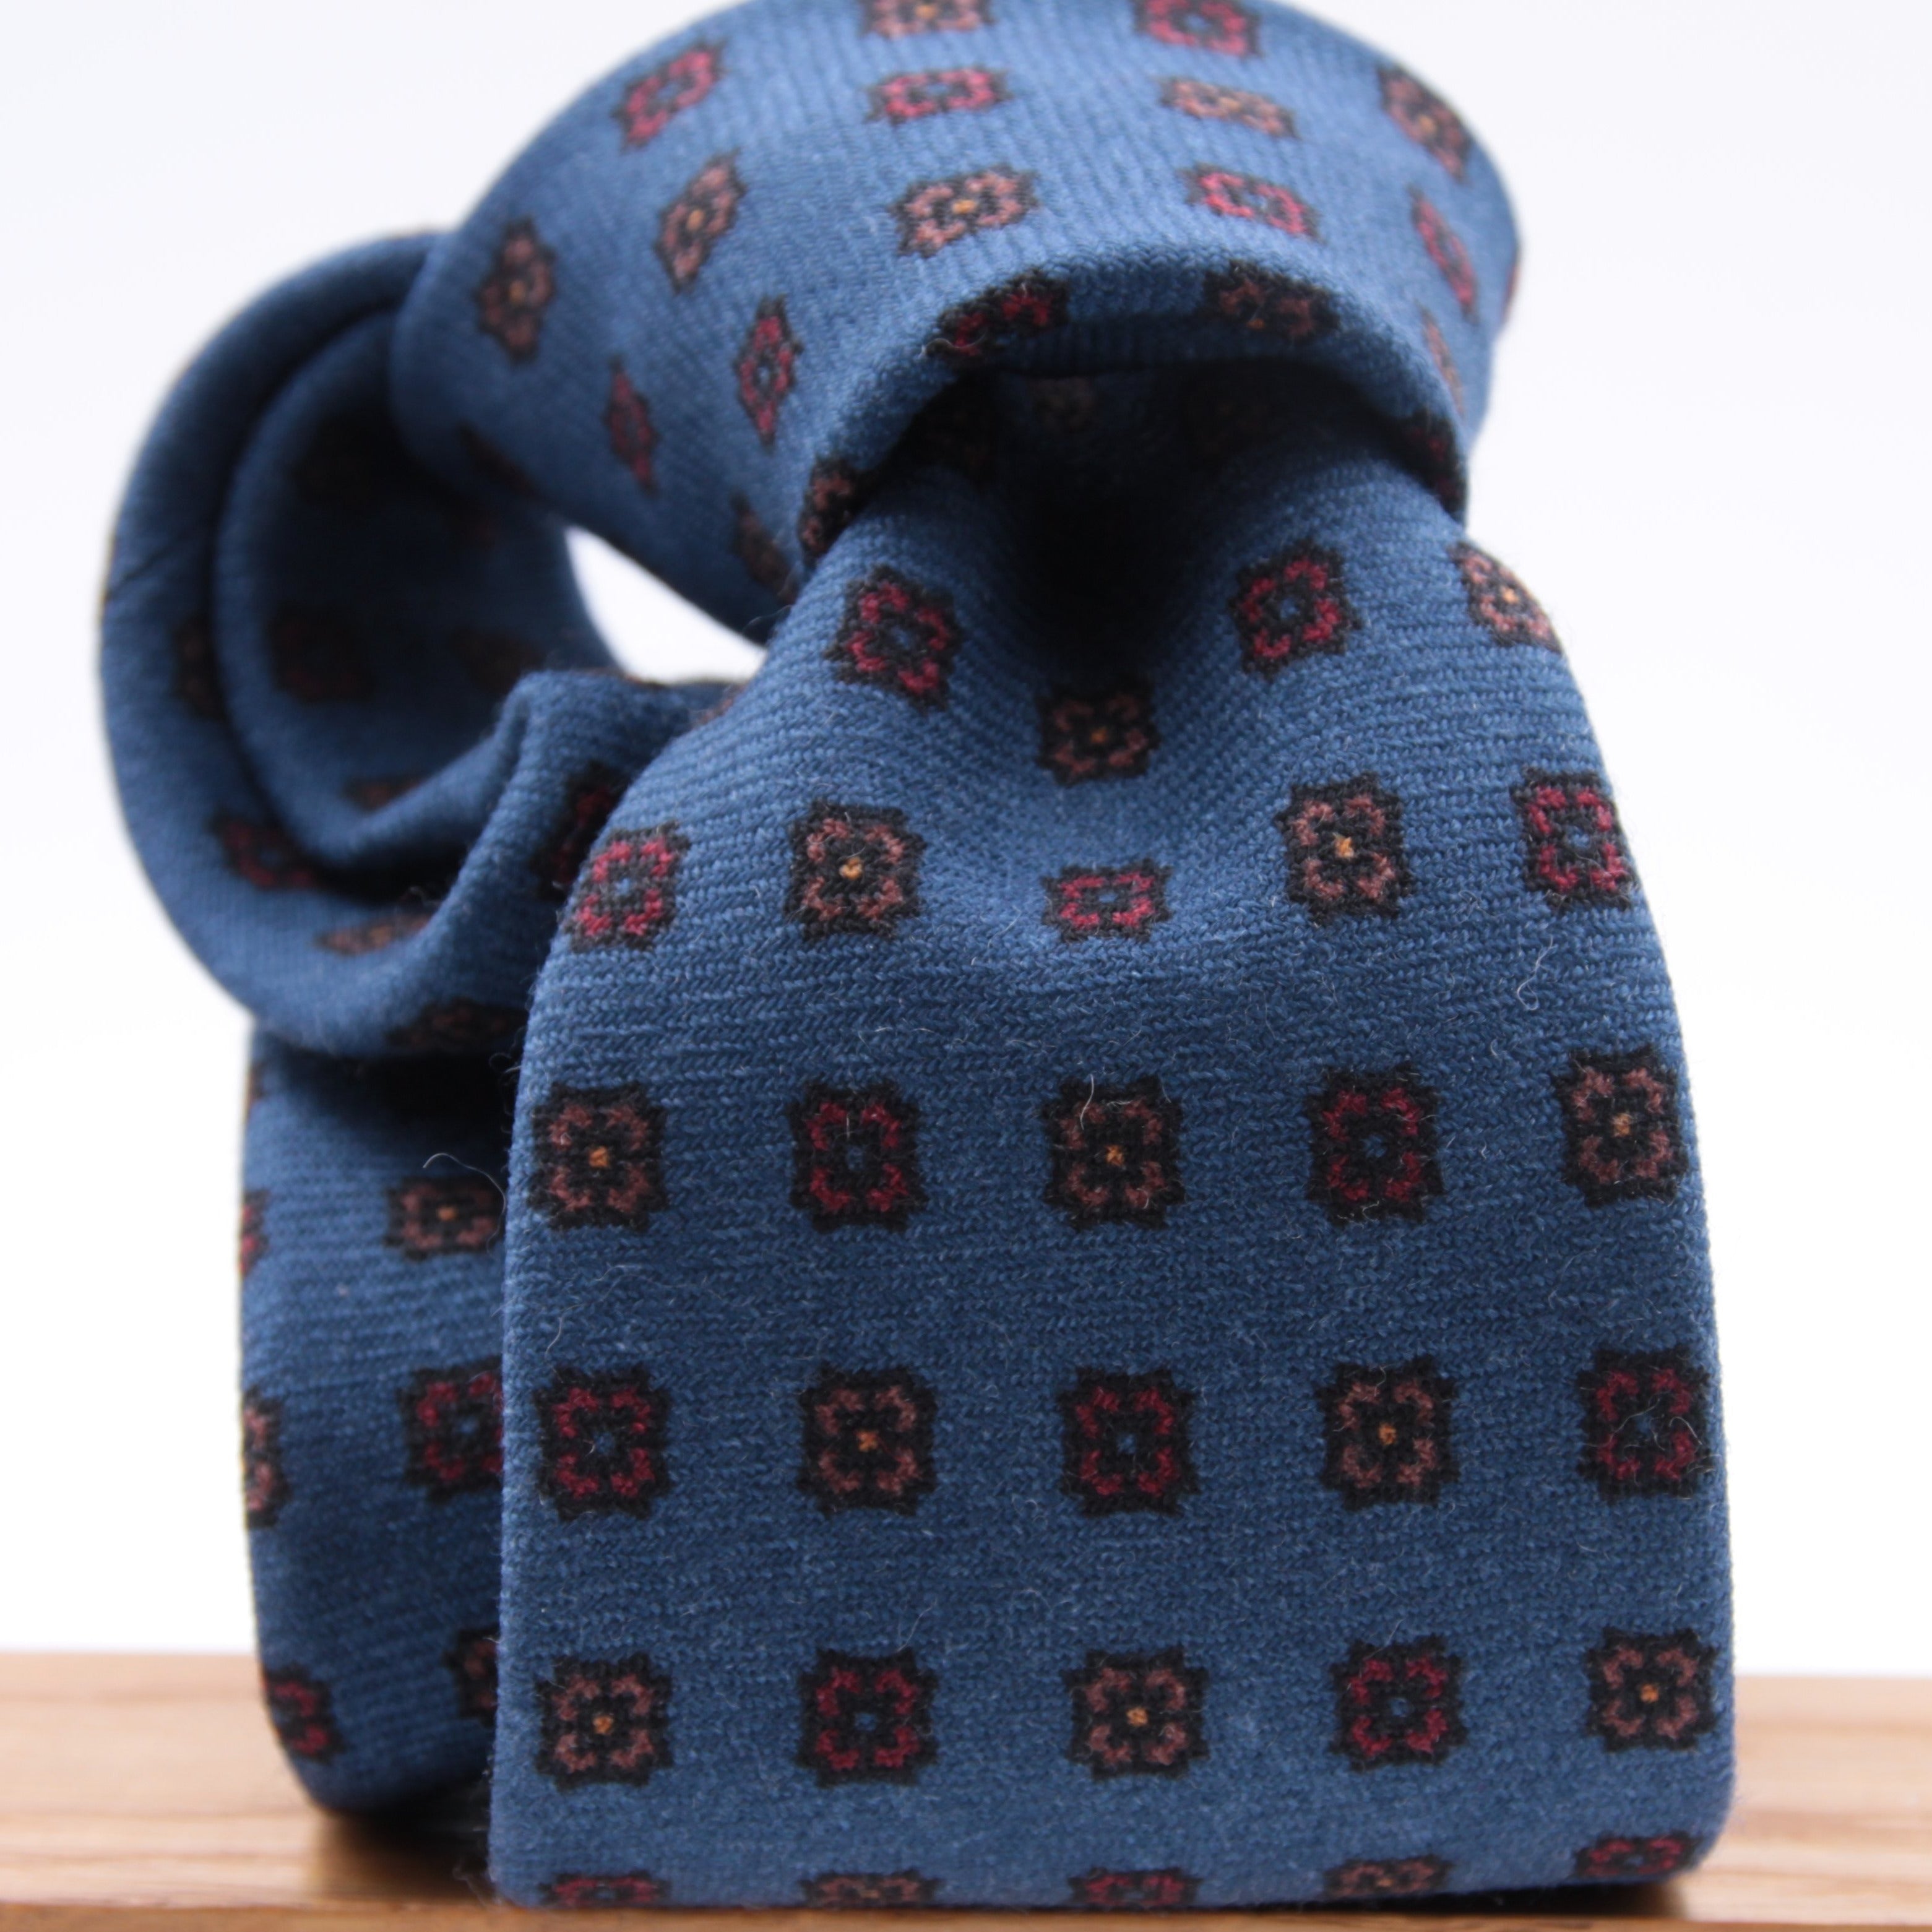 Holliday & Brown for Cruciani & Bella 100% Printed Wool  Tipped Light Blue, Brown and Red Motif tie   Handmade in Italy 8 cm x 148 cm #5093